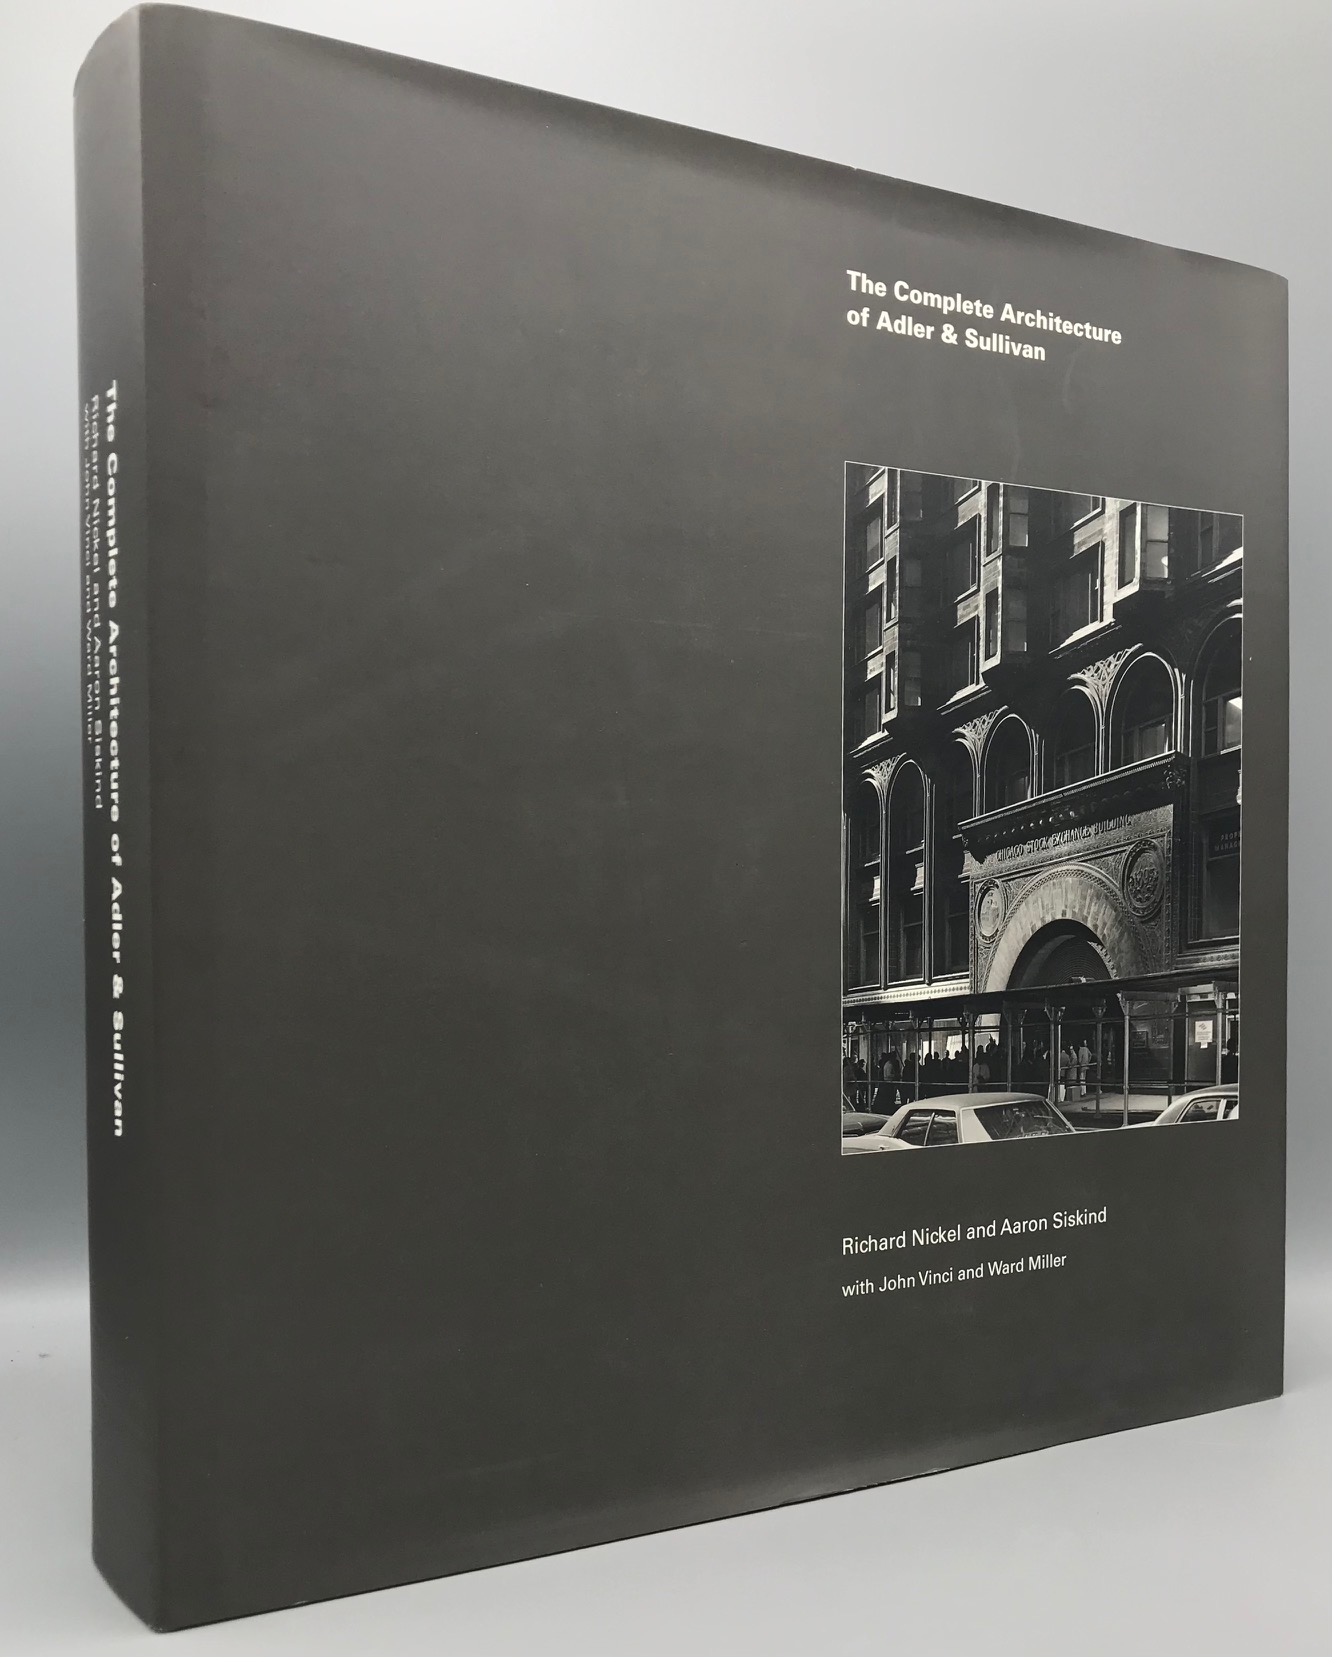 THE COMPLETE ARCHITECTURE OF ADLER AND SULLIVAN by Richard Nickel & Aaron Siskind - 2010 [First Edition]